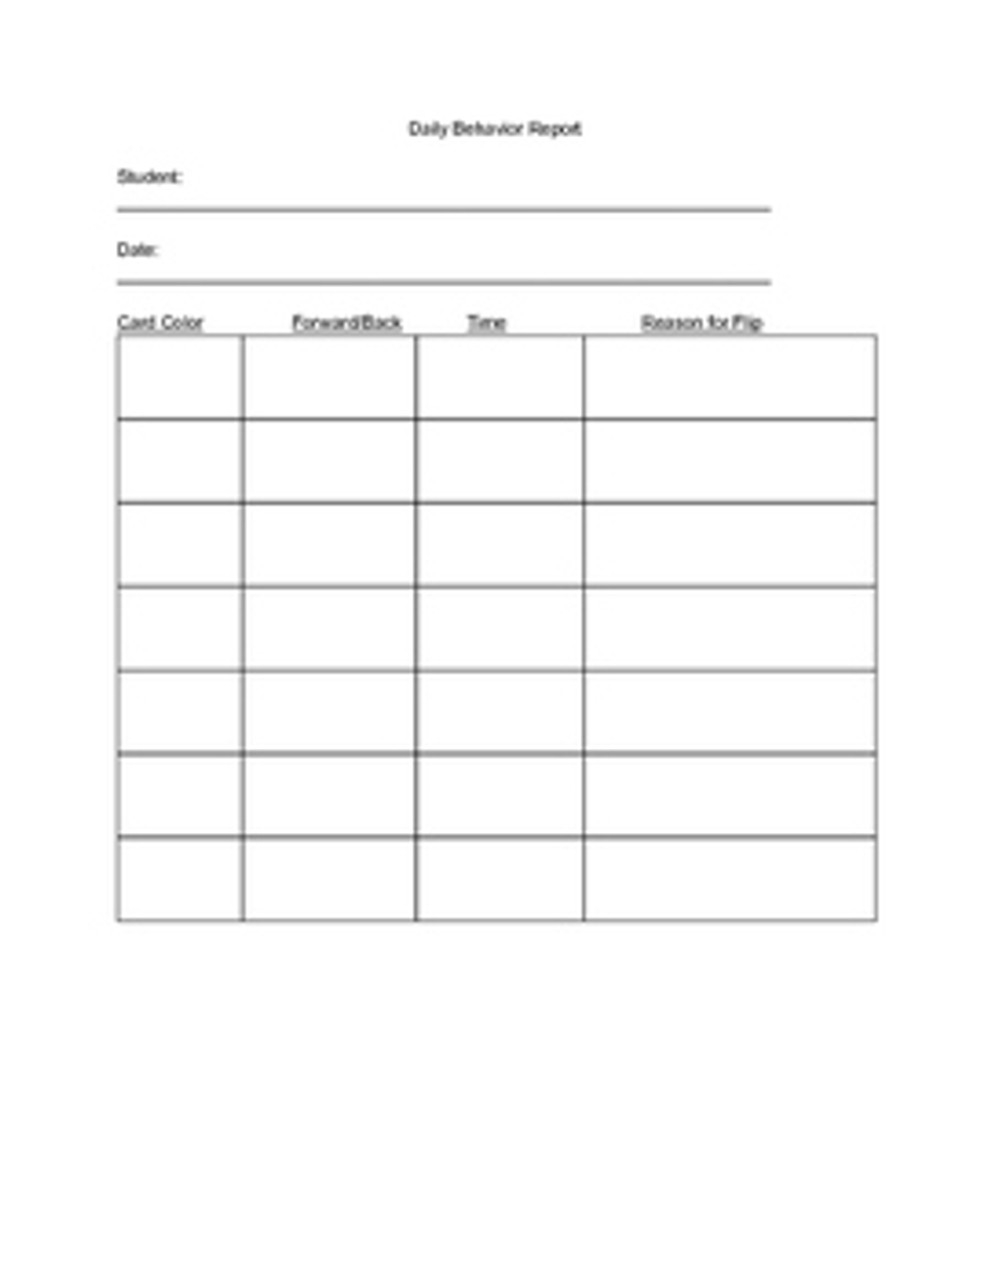 Daily Behavior Report Template - Amped Up Learning For Daily Behavior Report Template